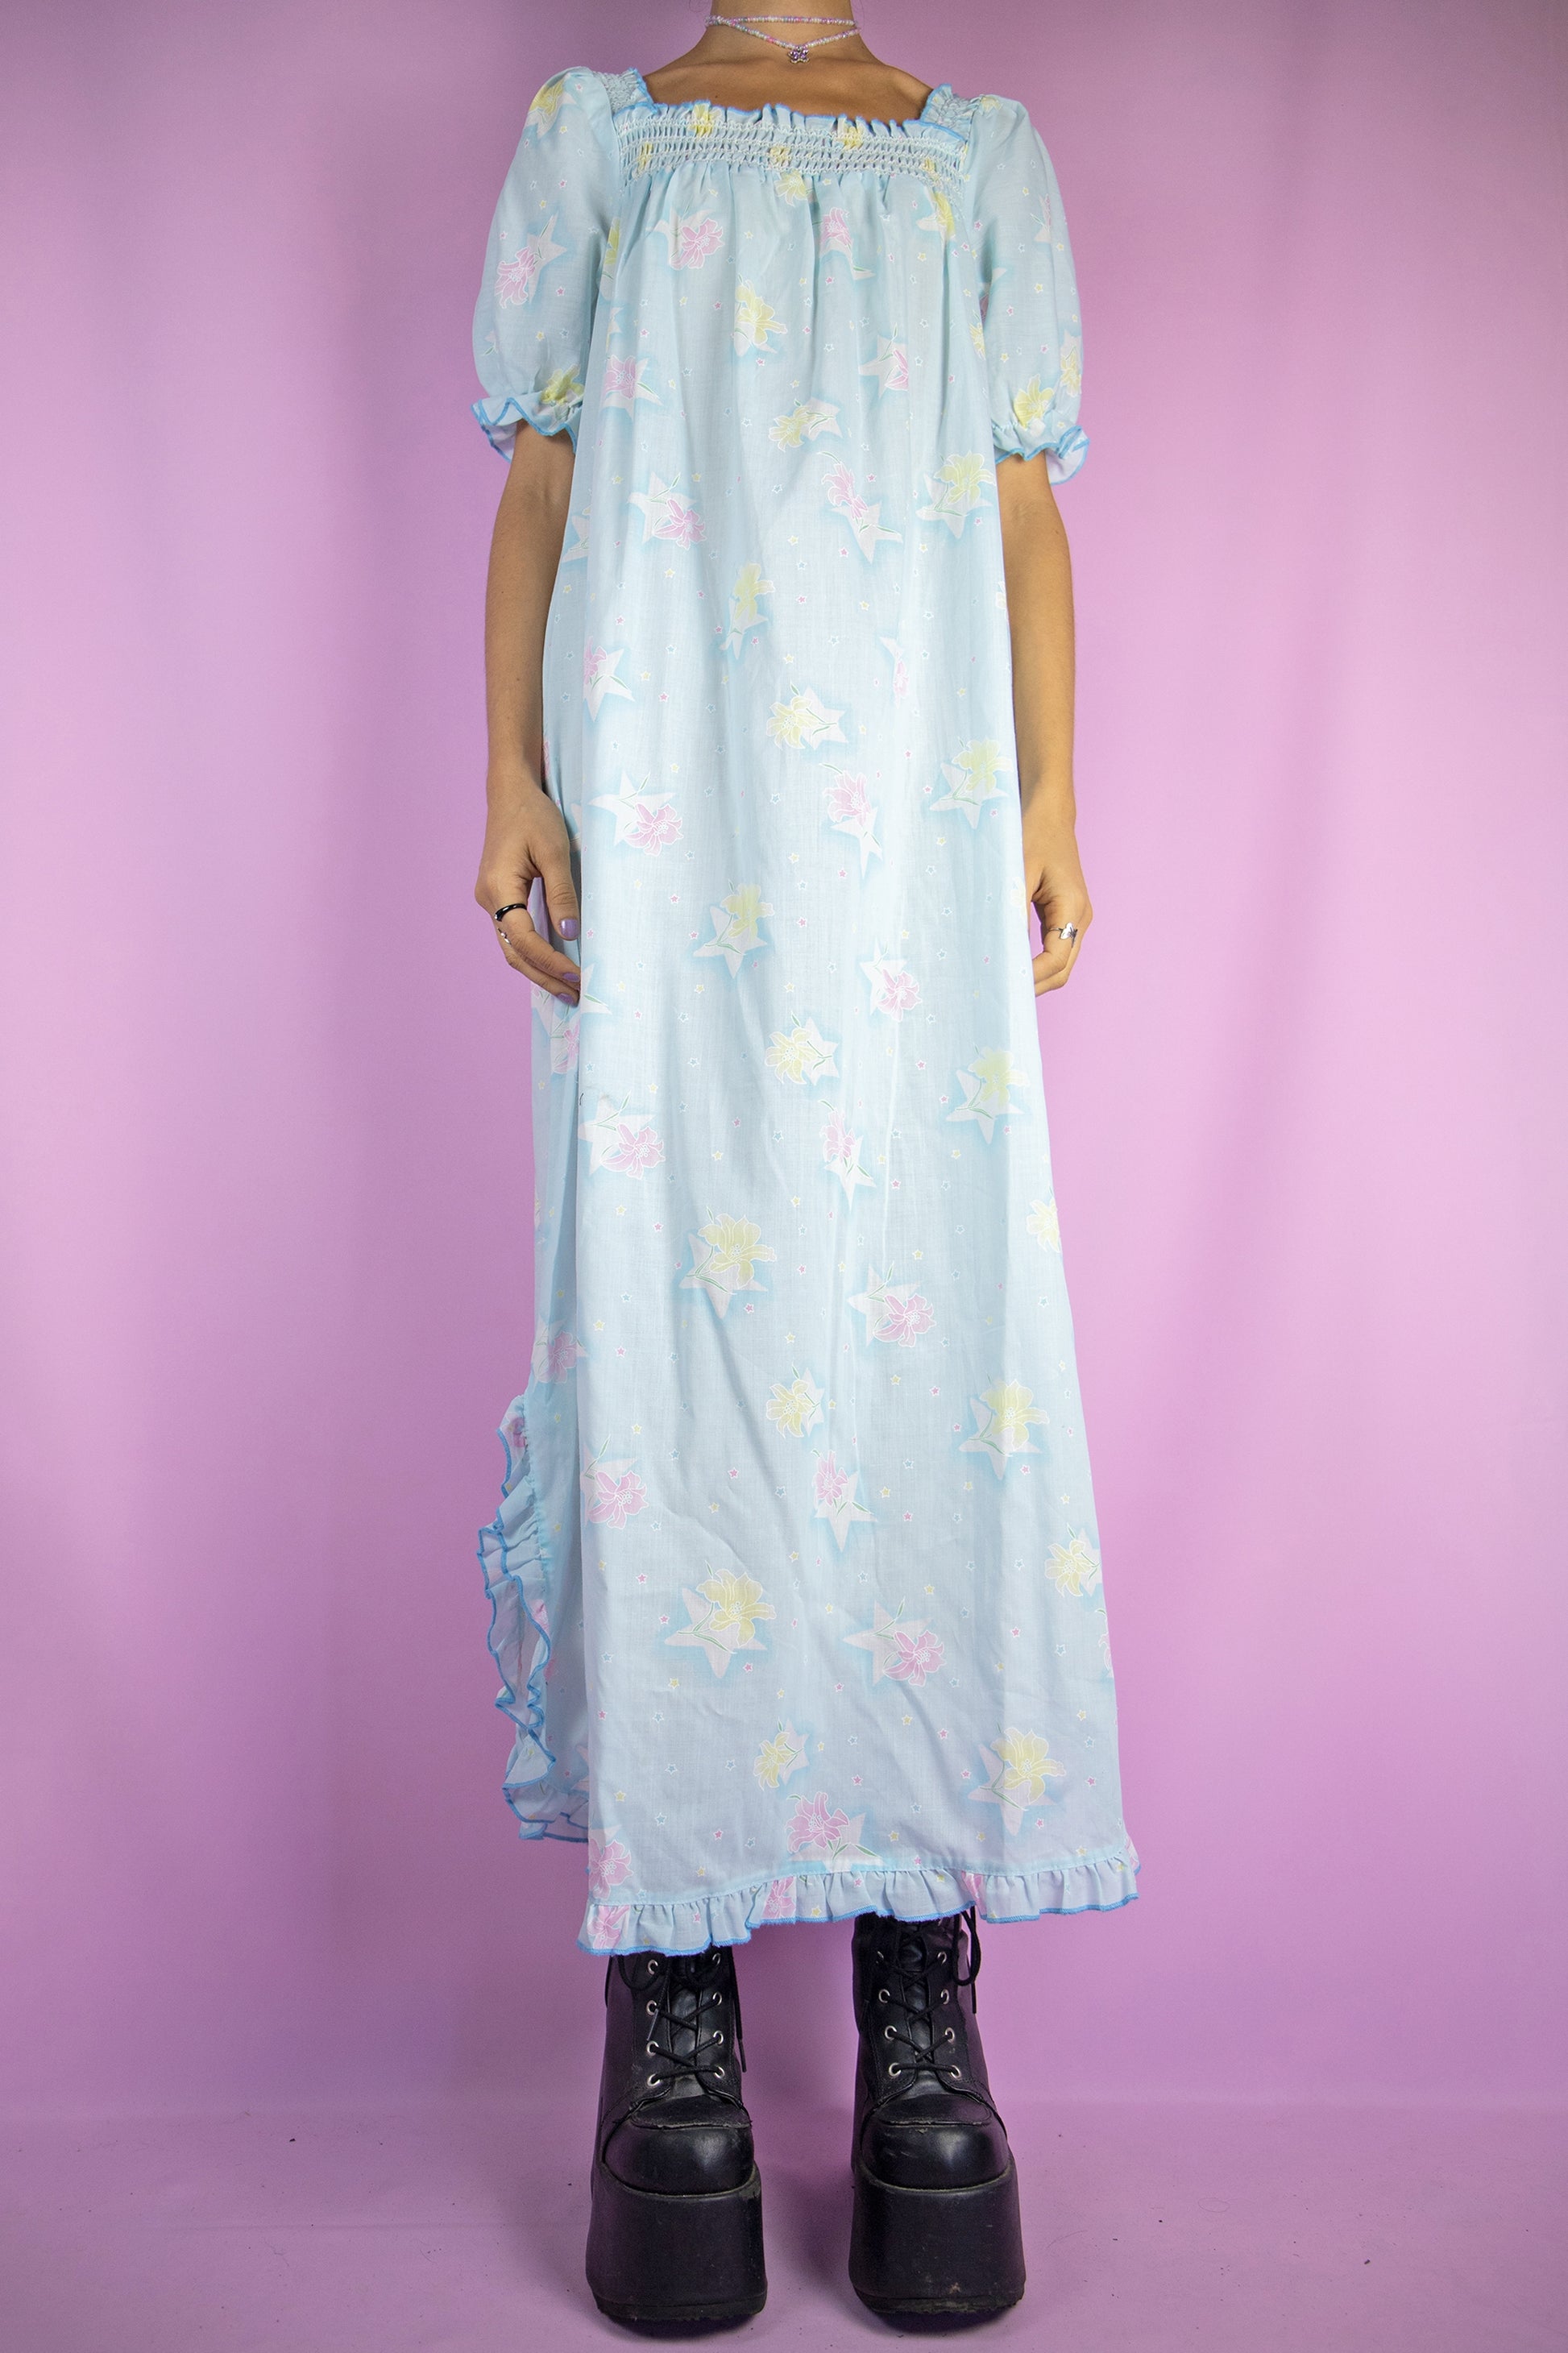 The Vintage 80s Blue Floral Nightgown Dress is a pastel light blue floral maxi dress with shirred front, short puff sleeves, side slits and ruffle details. Gorgeous romantic sleepwear 1980s night dress.